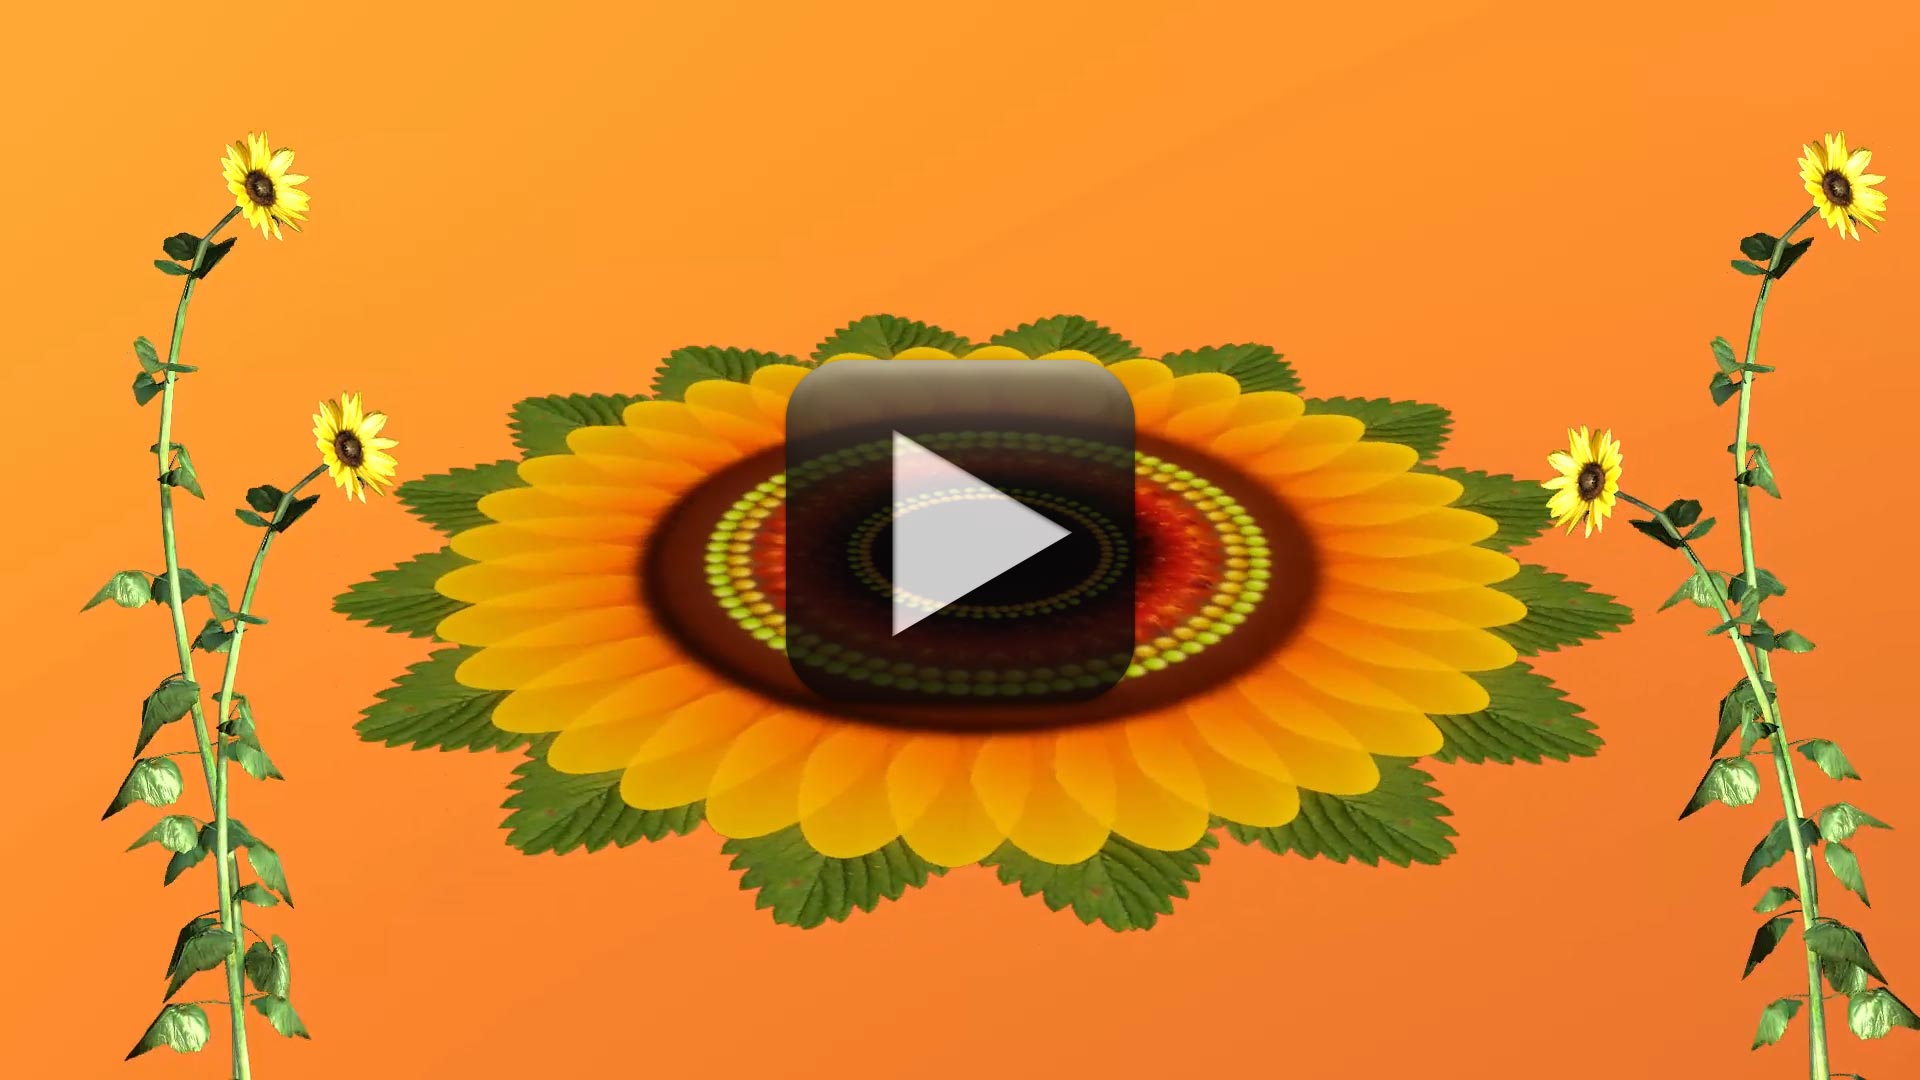 Flowers Animation Video Free Download | All Design Creative